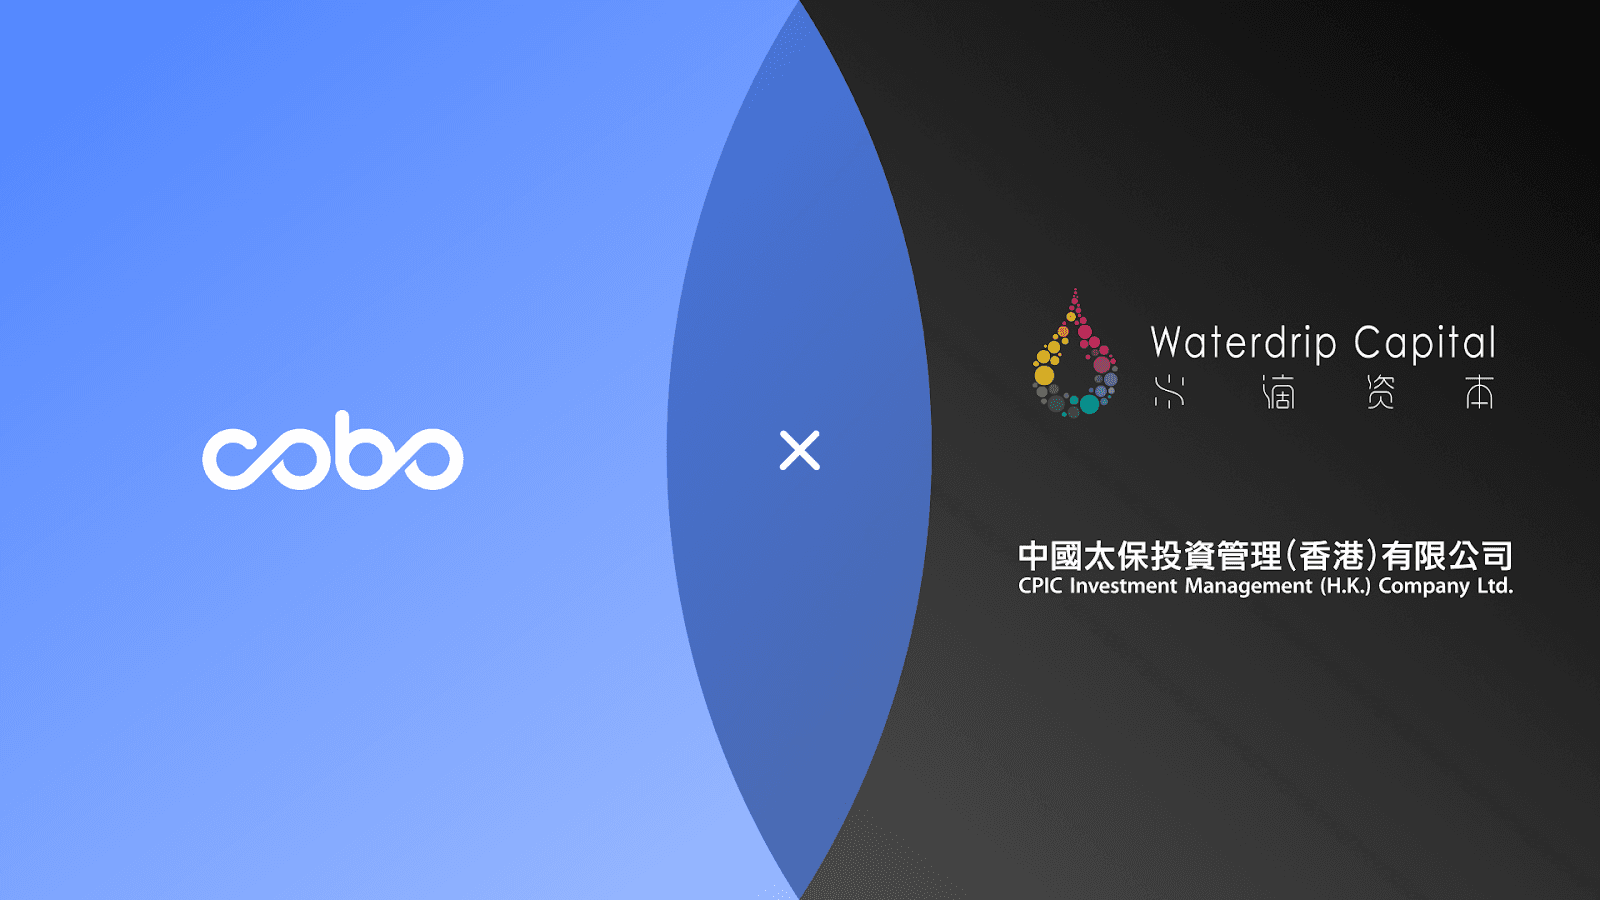 Leading Custody Provider, Cobo, Forges Strategic Partnership with Pacific Waterdrip Digital Asset Fund to Safeguard Digital Assets in Hong Kong